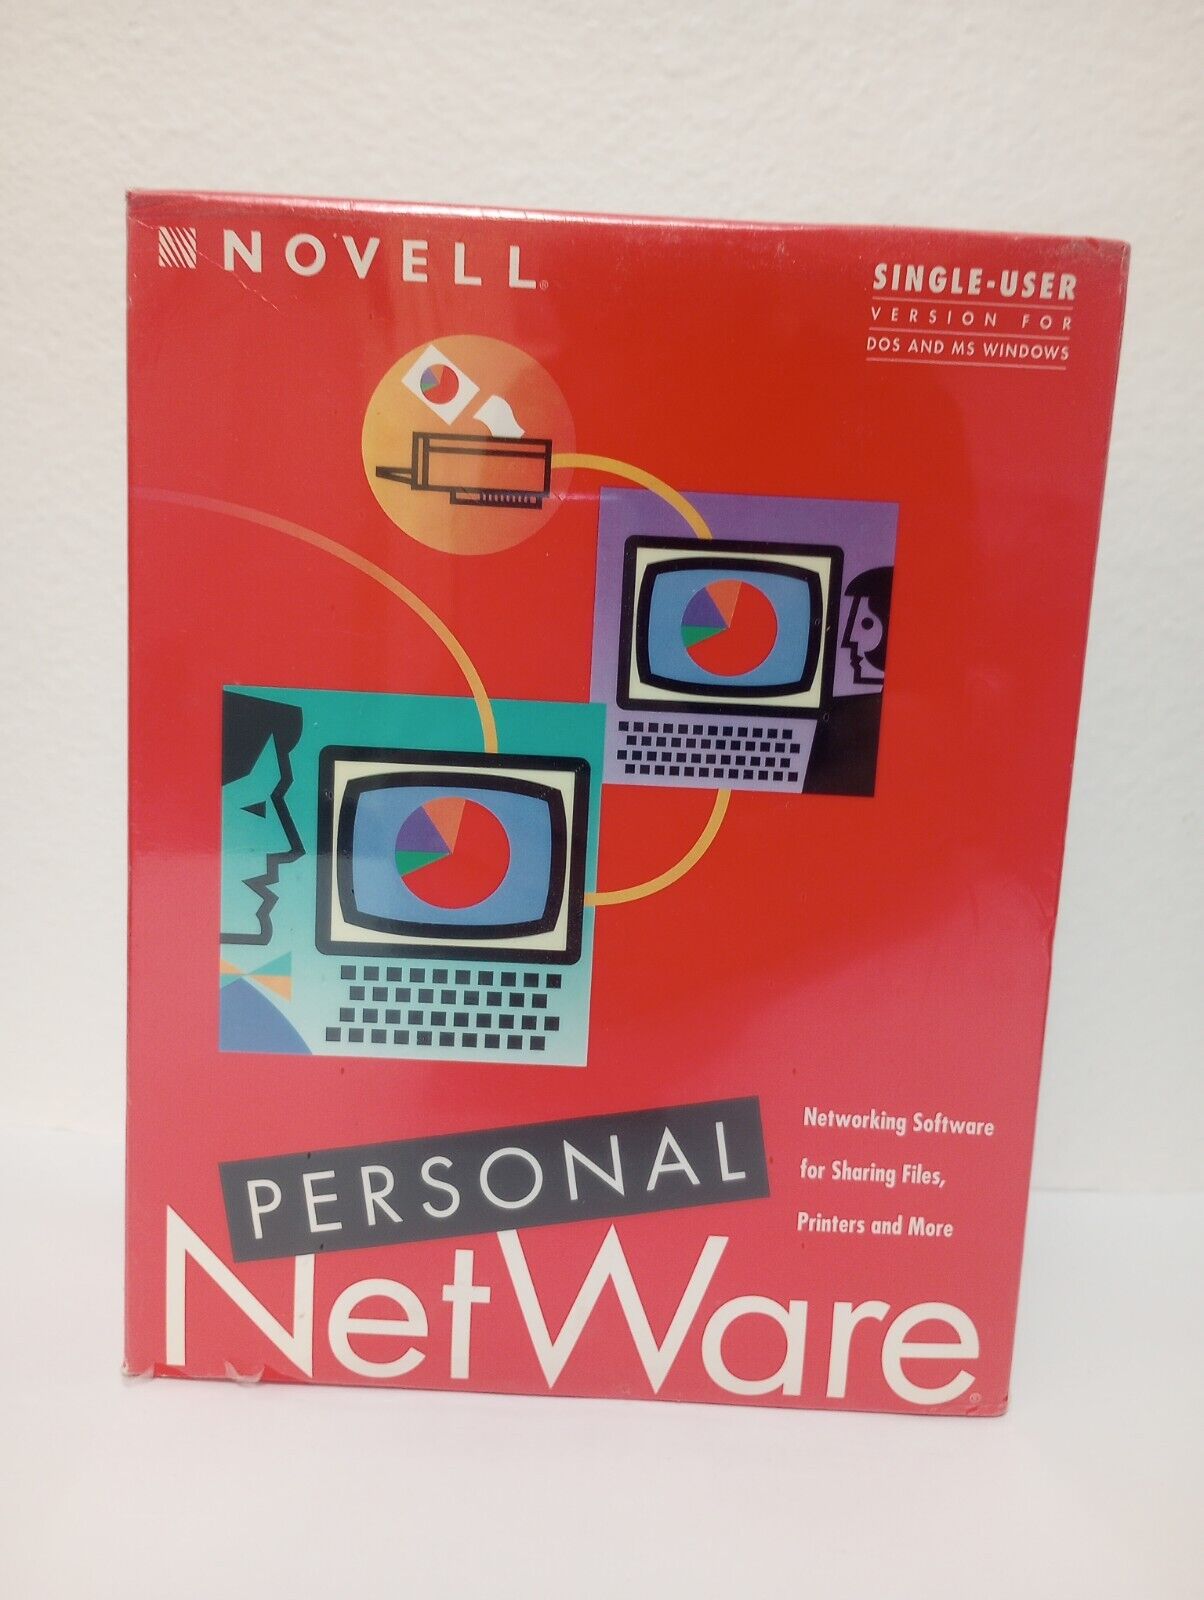 Novell Personal NetWare Networking Software For Sharing Files, Printers And More